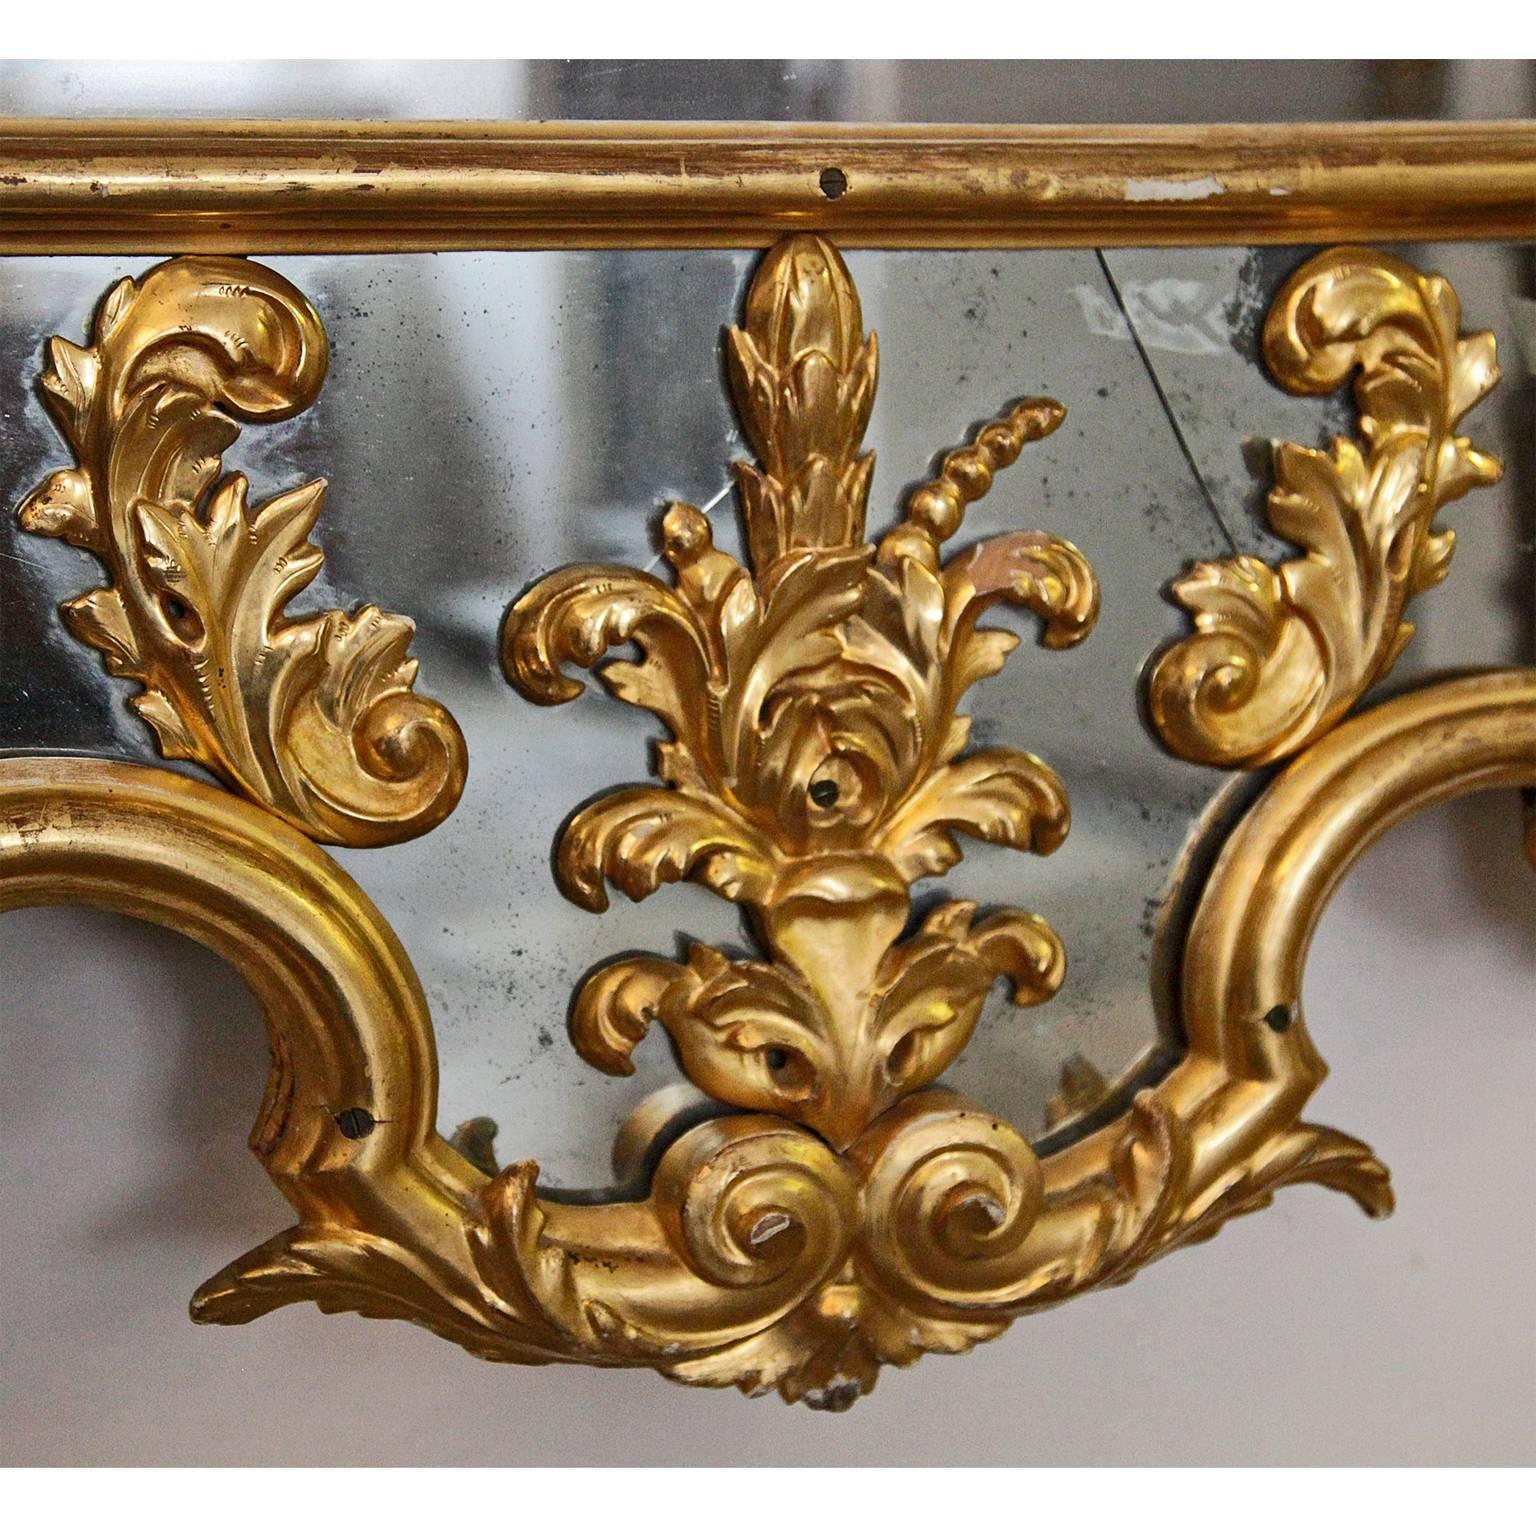 Large palace mirror, 1750 - 1770. The gilding was restored in the 19th century. 